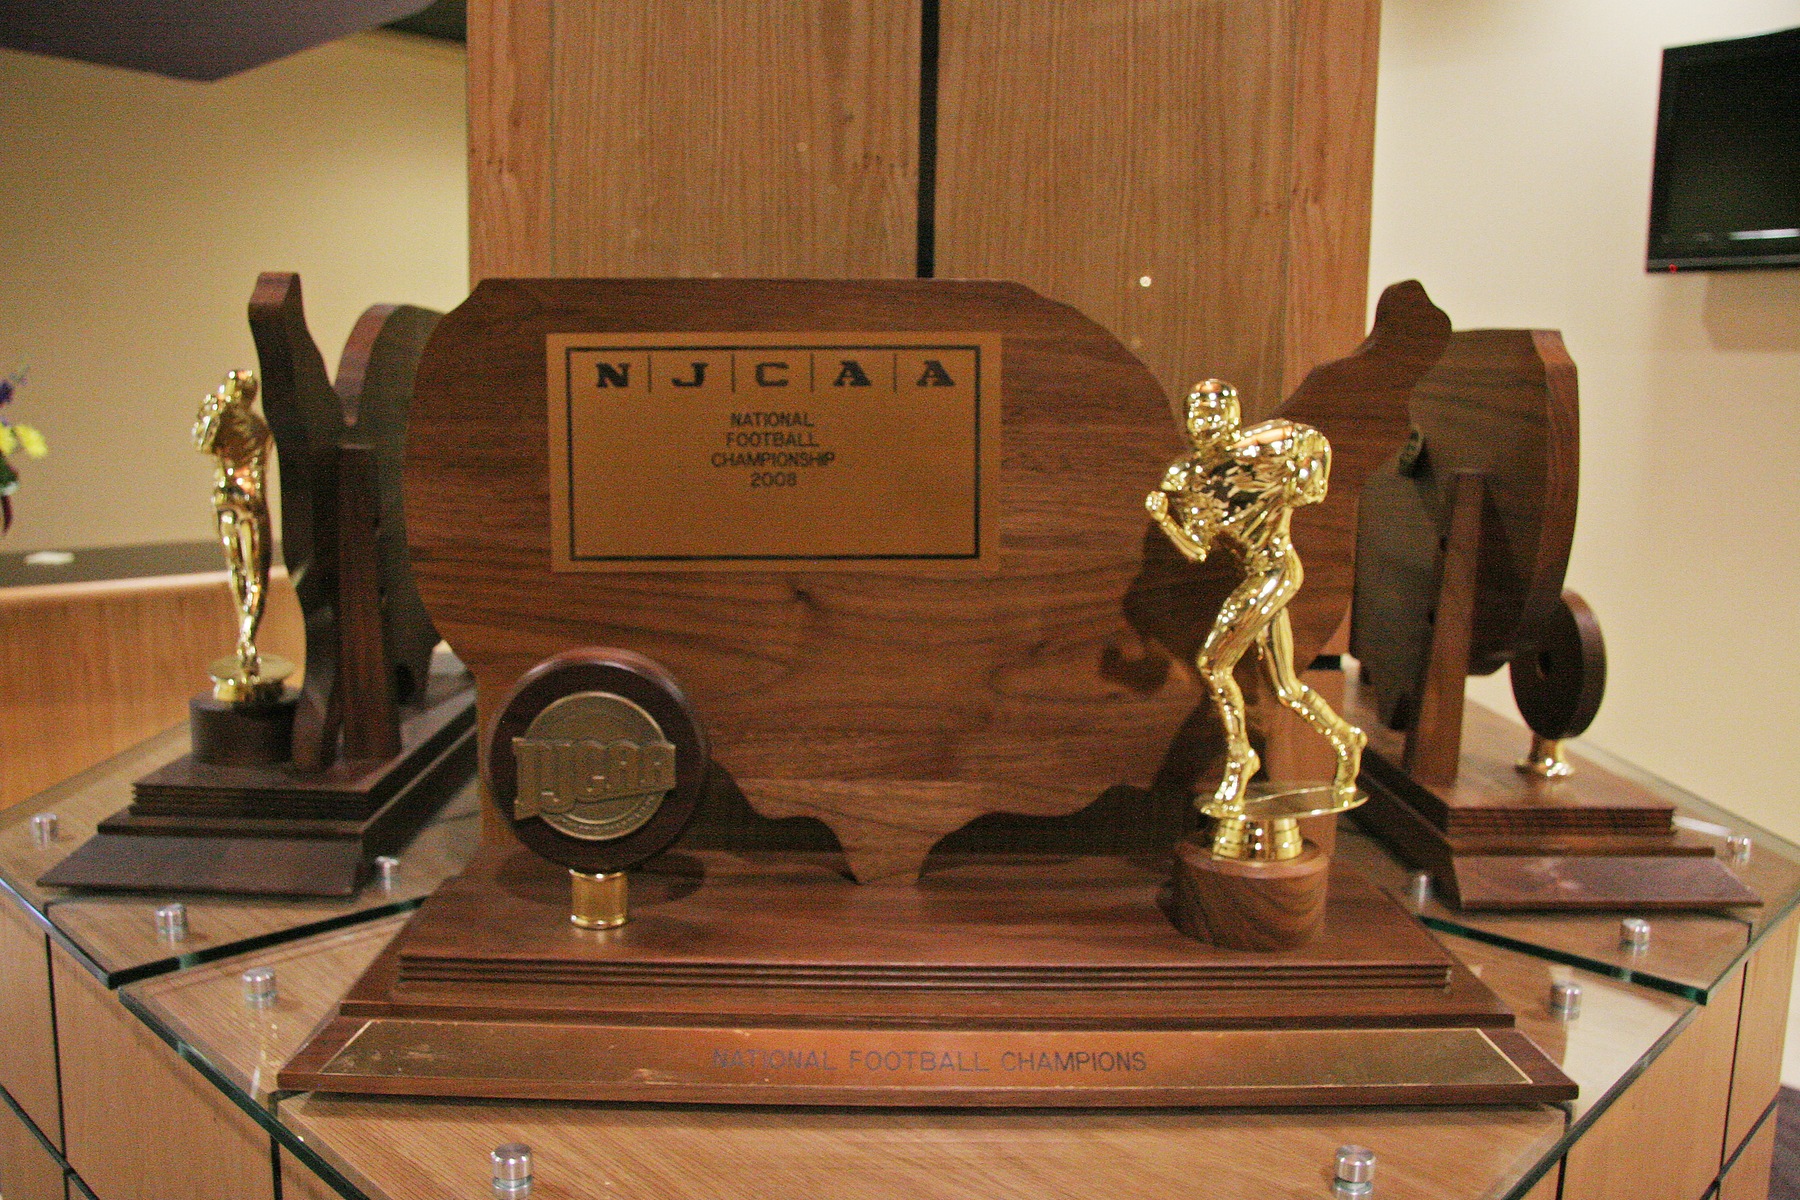 National championship trophies on display